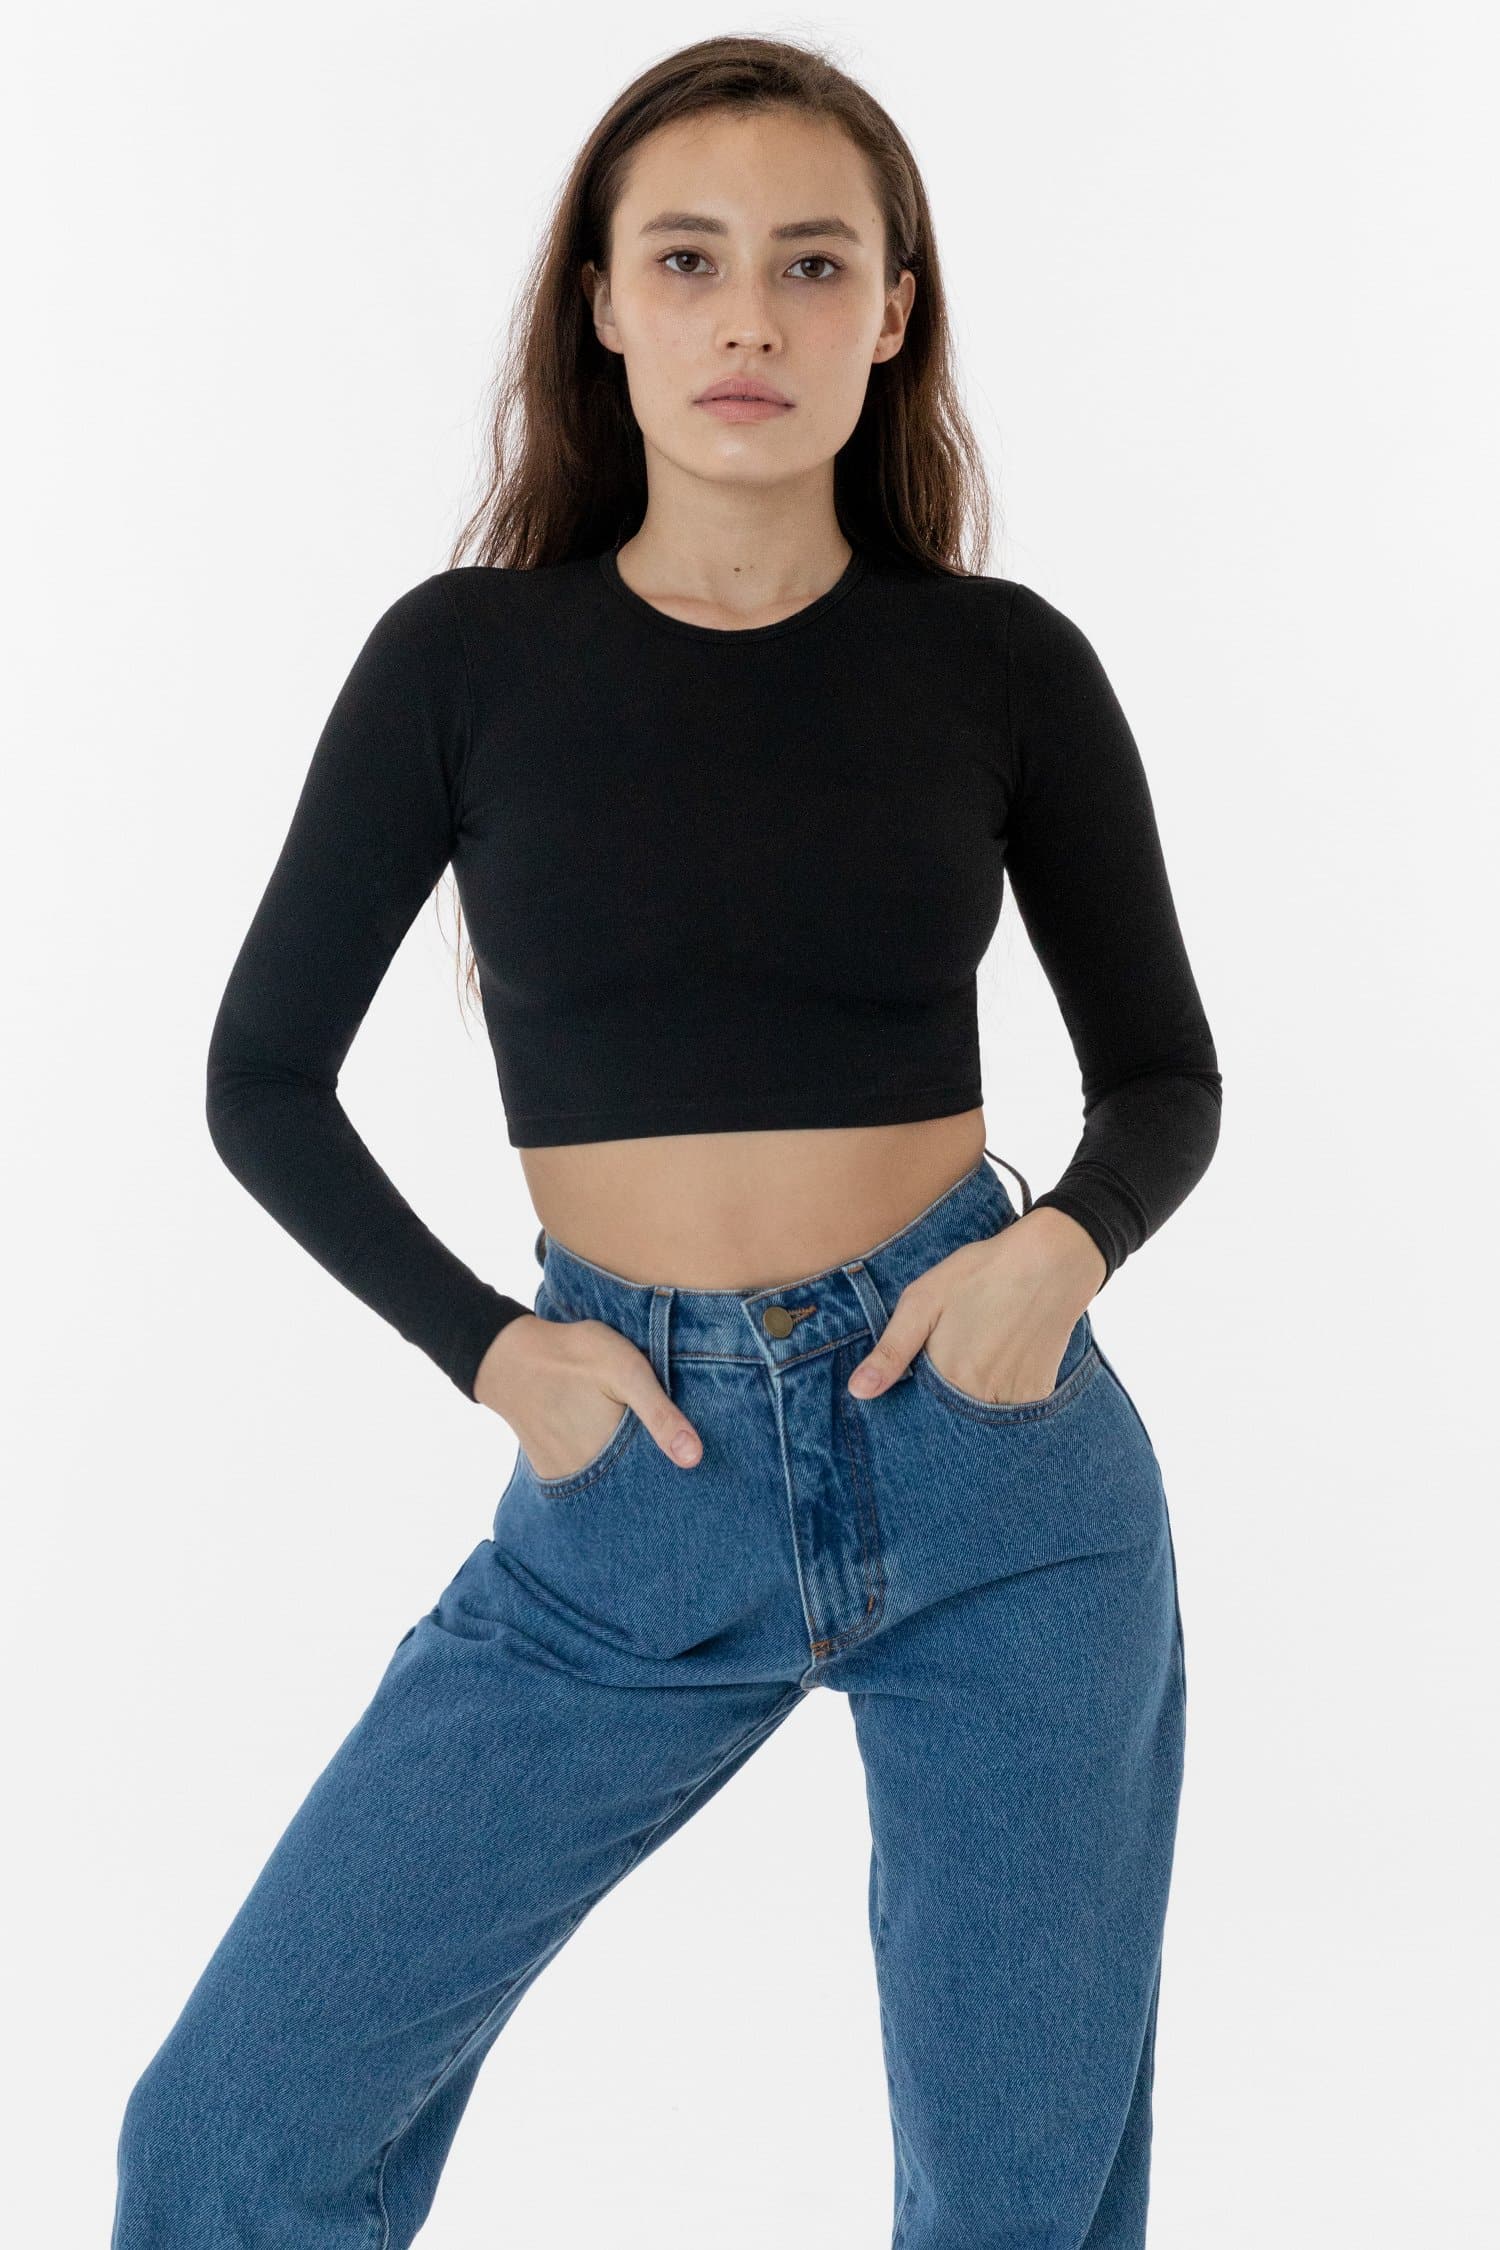 Off White Long Sleeve Cropped Sweater, Crop Top Sweater, Crop Tops for Women,  Cropped Top, Sexy Crop Tops, Crop Top Teens, Cropped Top Woman -  Canada